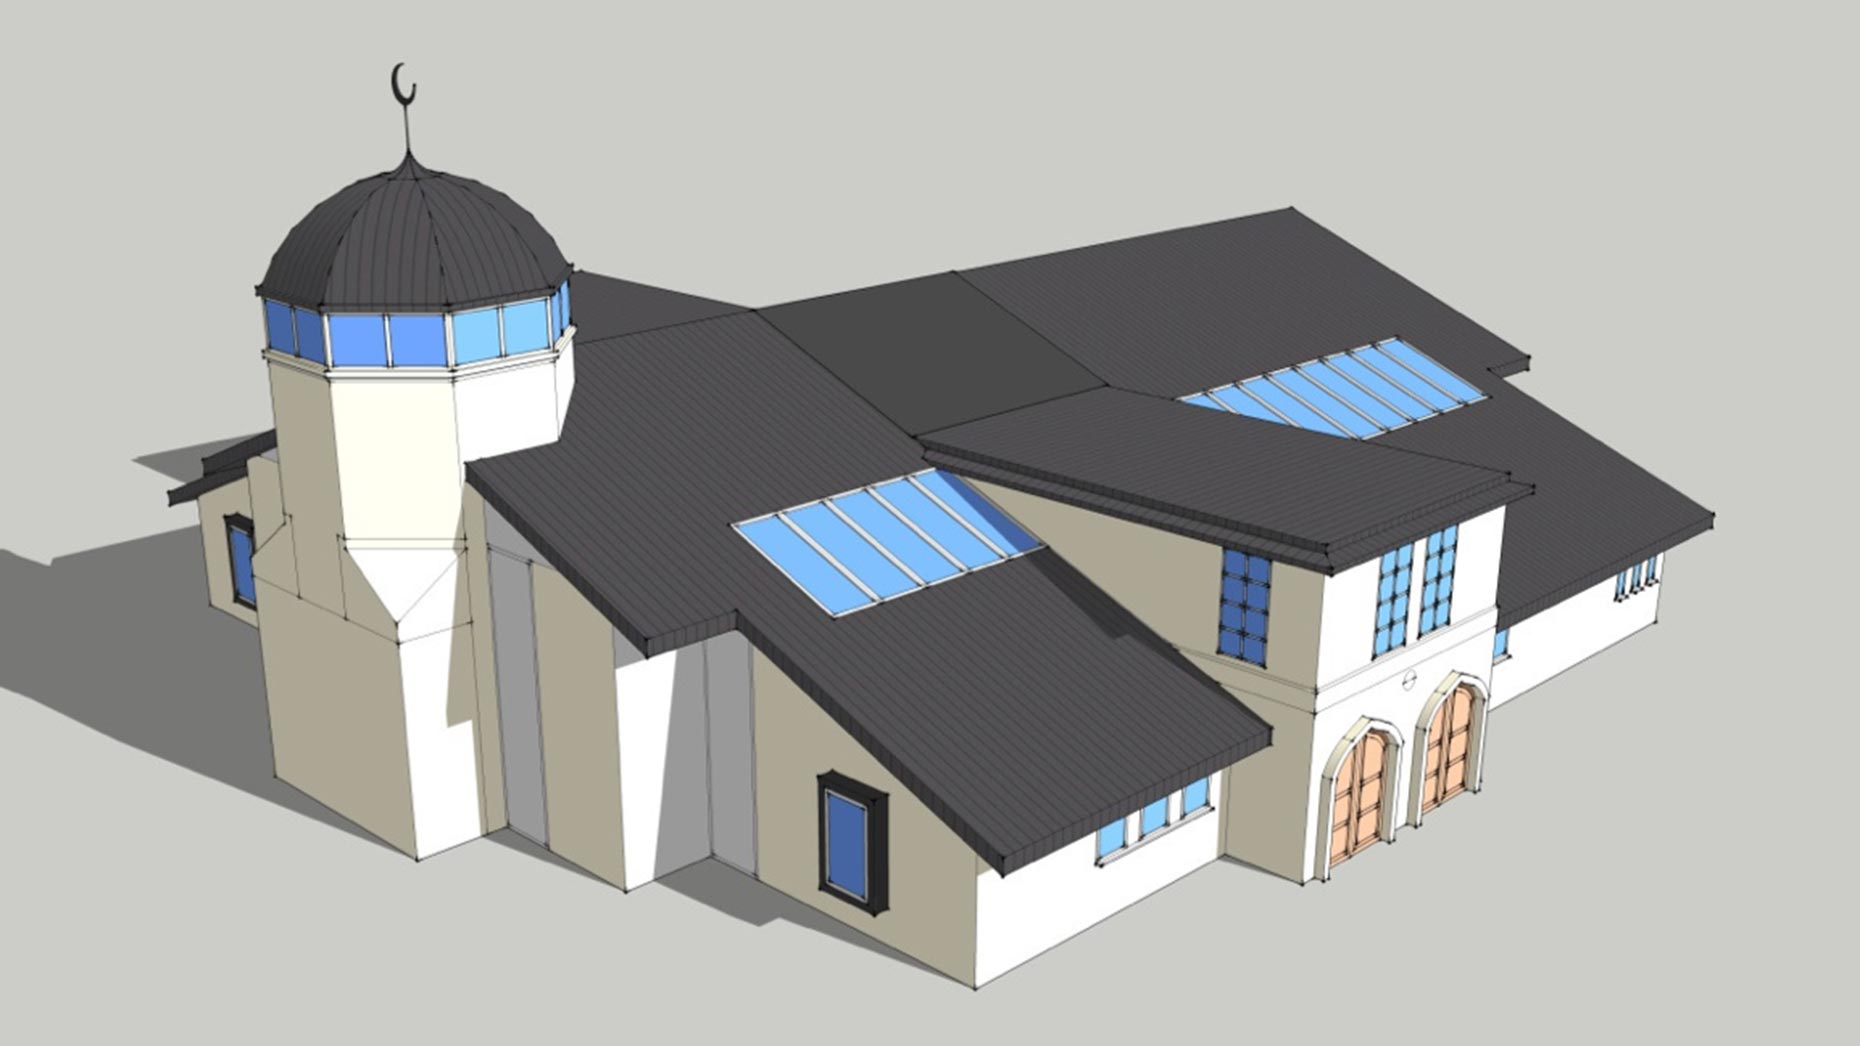 The latest Lincoln mosque designs